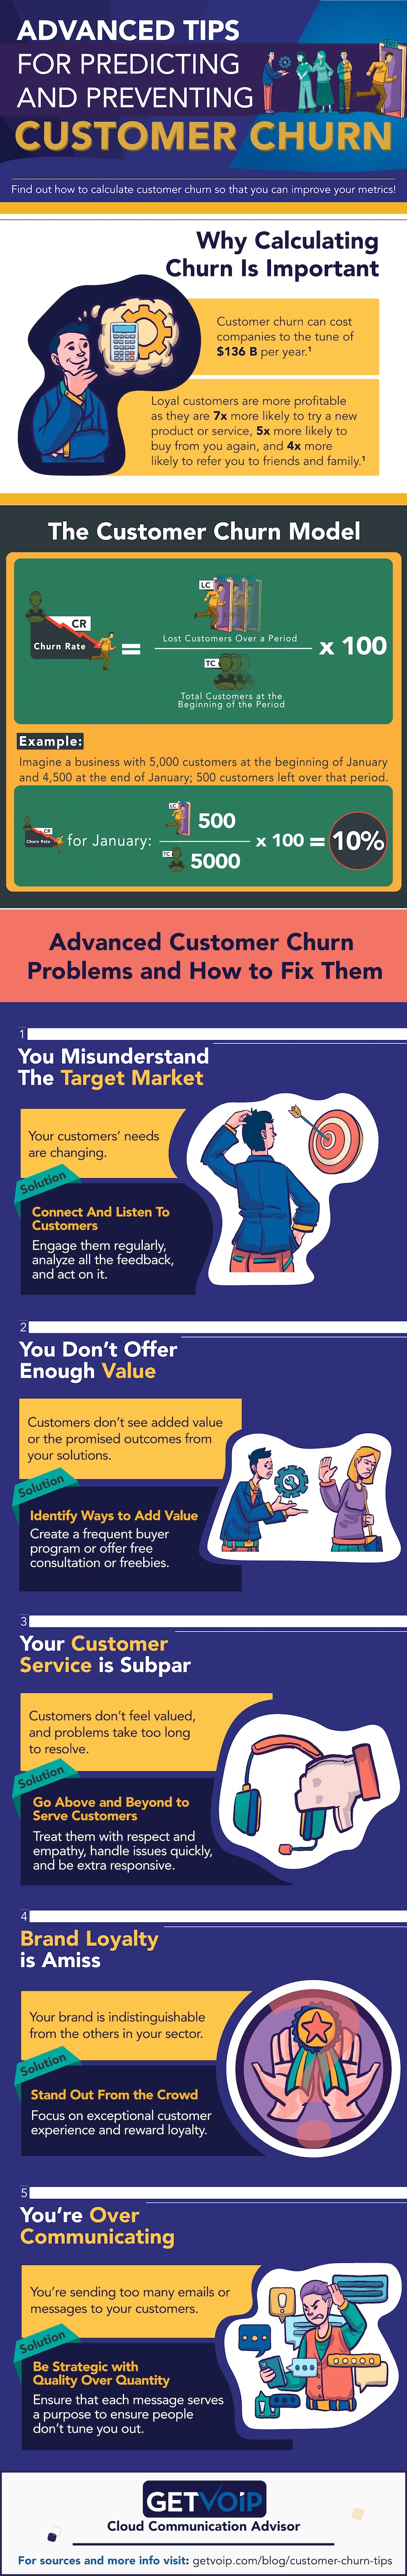 Tips for predicting and preventing customer churn infographic